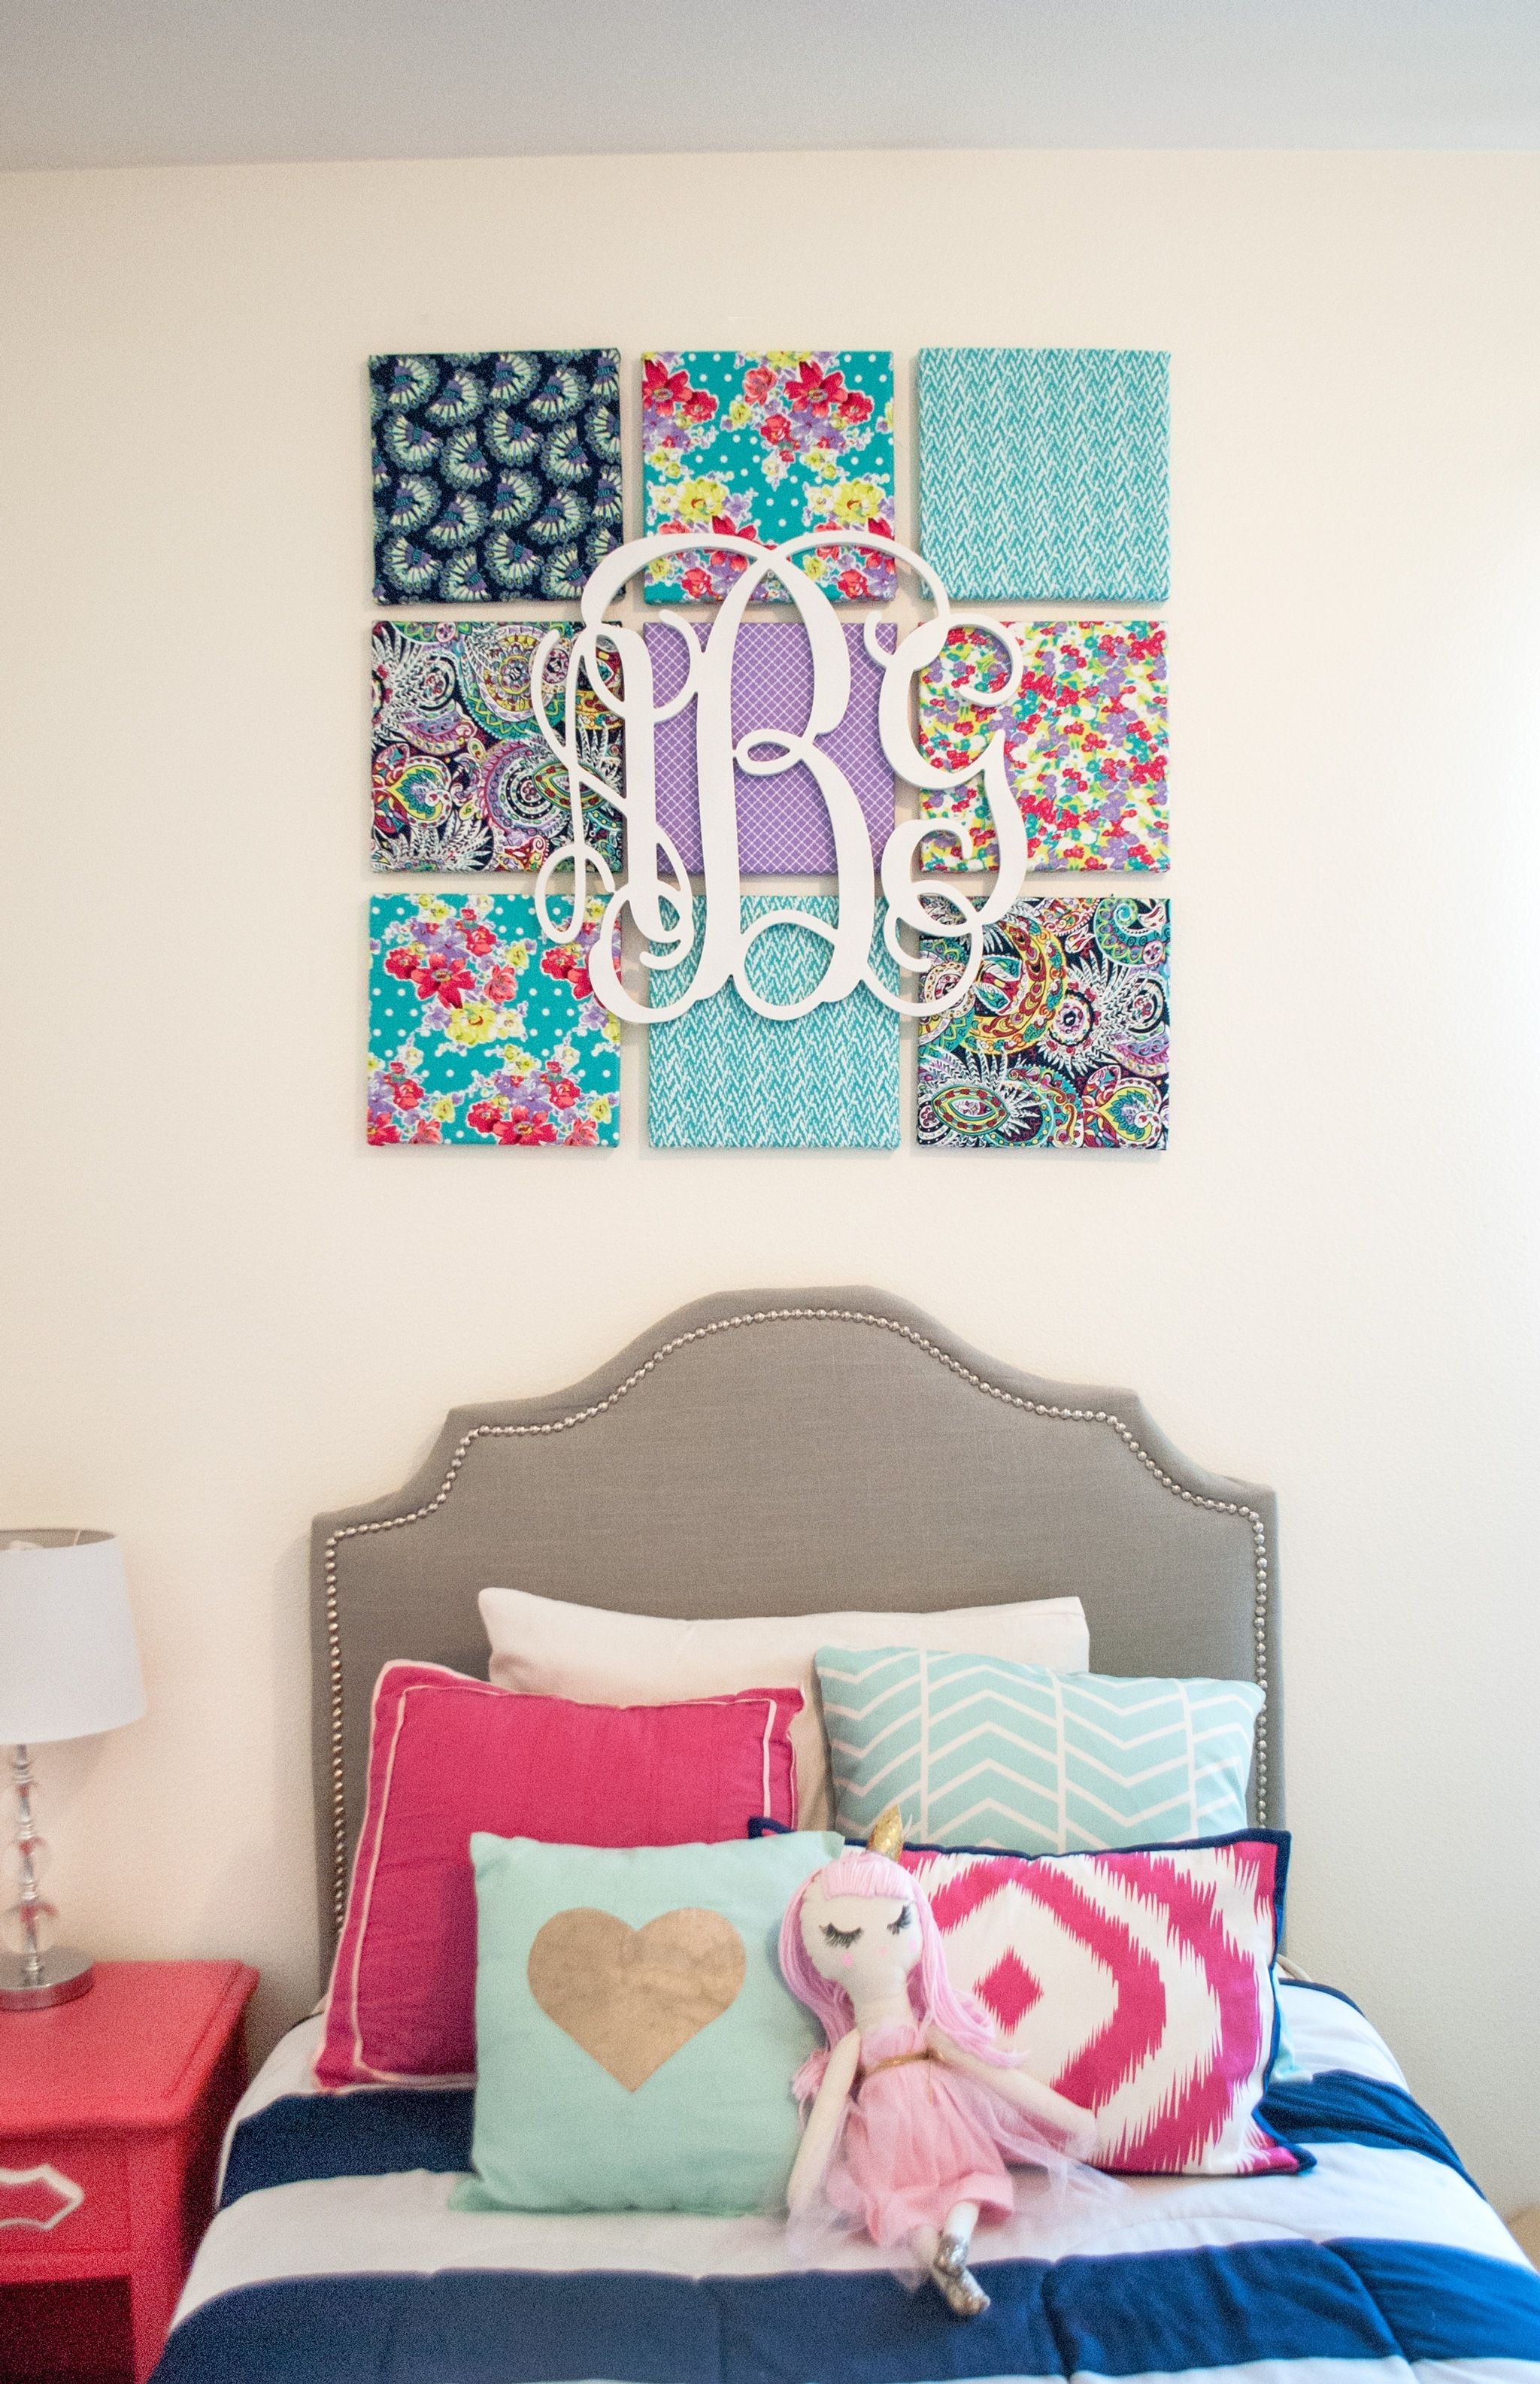 Diy Canvas Art Marvelous Diy Canvas Wall Art – Home Design And Wall Intended For Diy Canvas Wall Art (Photo 10 of 20)